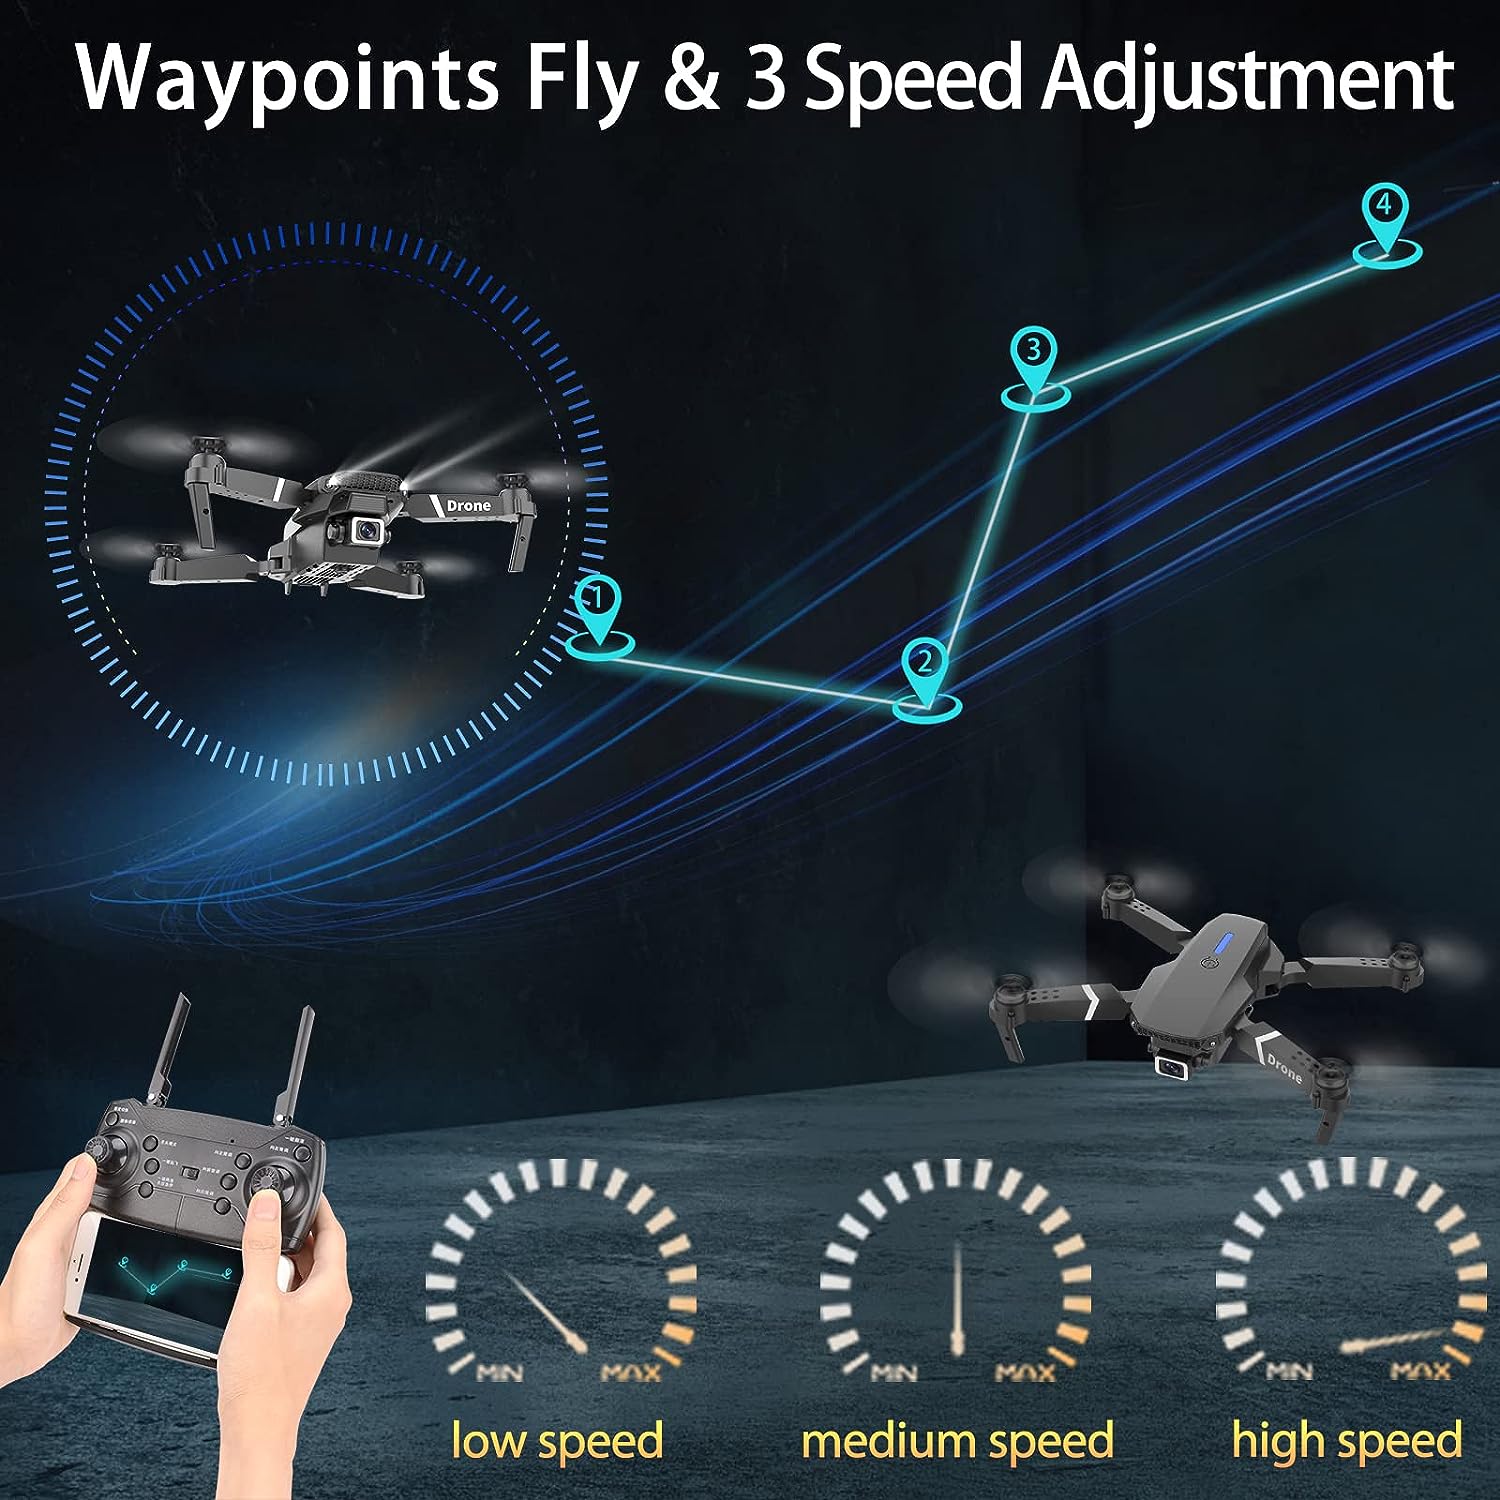 Tablet-Accessories-Drone-with-4K-Dual-HD-Camera-Foldable-Drone-WiFi-FPV-Live-Video-RC-Quadcopter-Mini-Drone-360-Degree-Flips-Trajectory-Flight-Auto-Hover-10